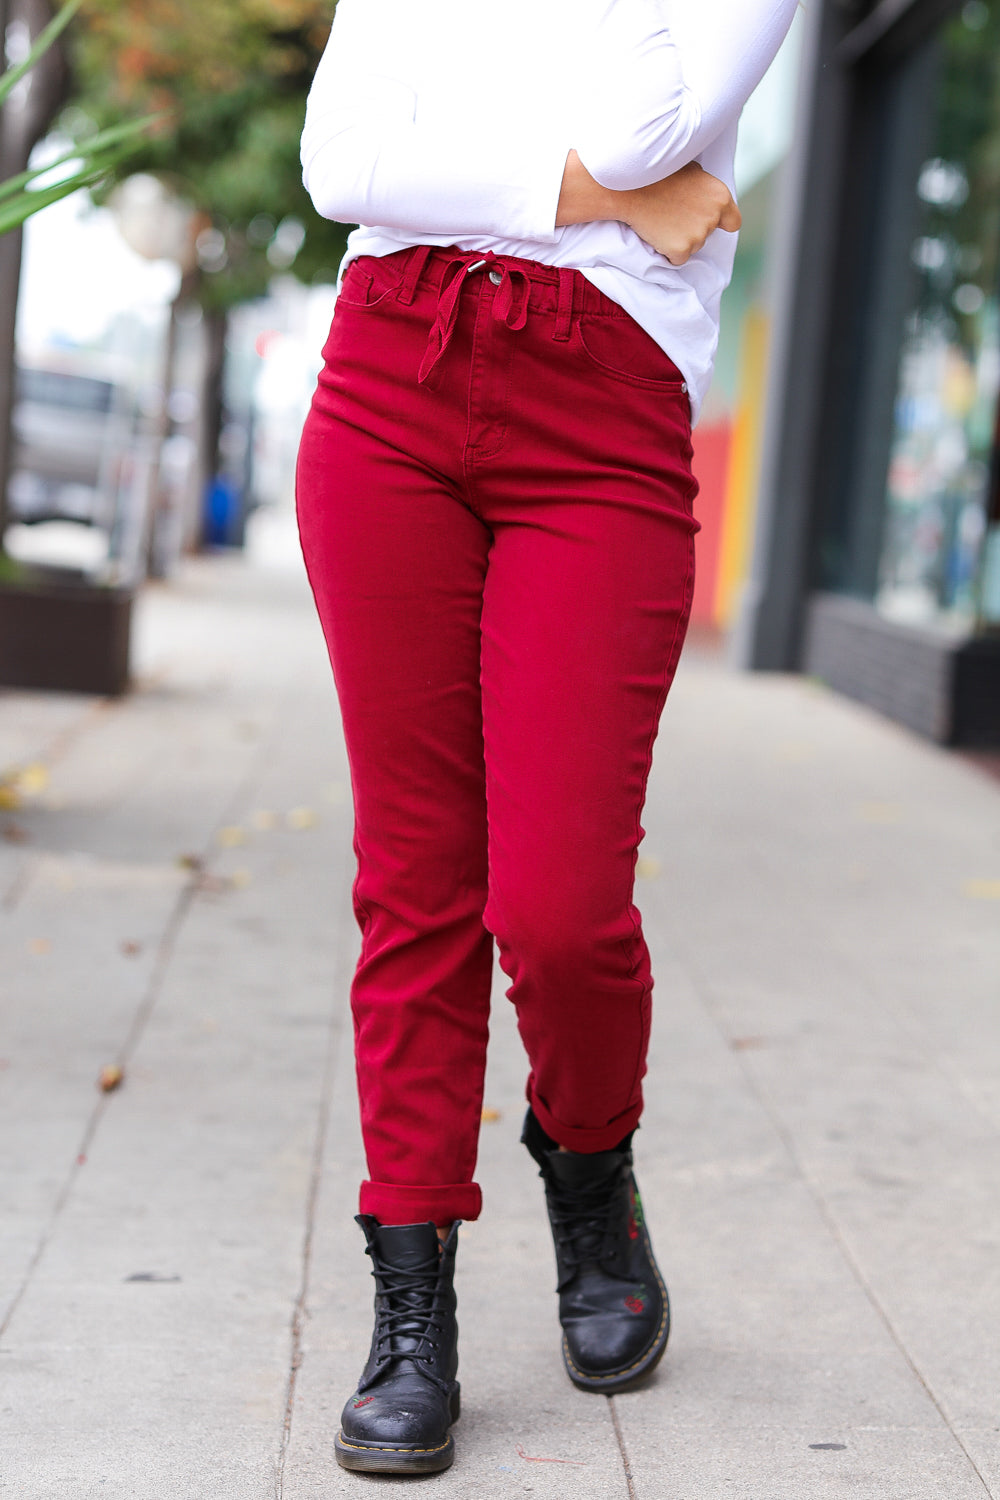 Under The Tree Scarlet High Waist Drawstring Jeans - Sybaritic Bags & Clothing